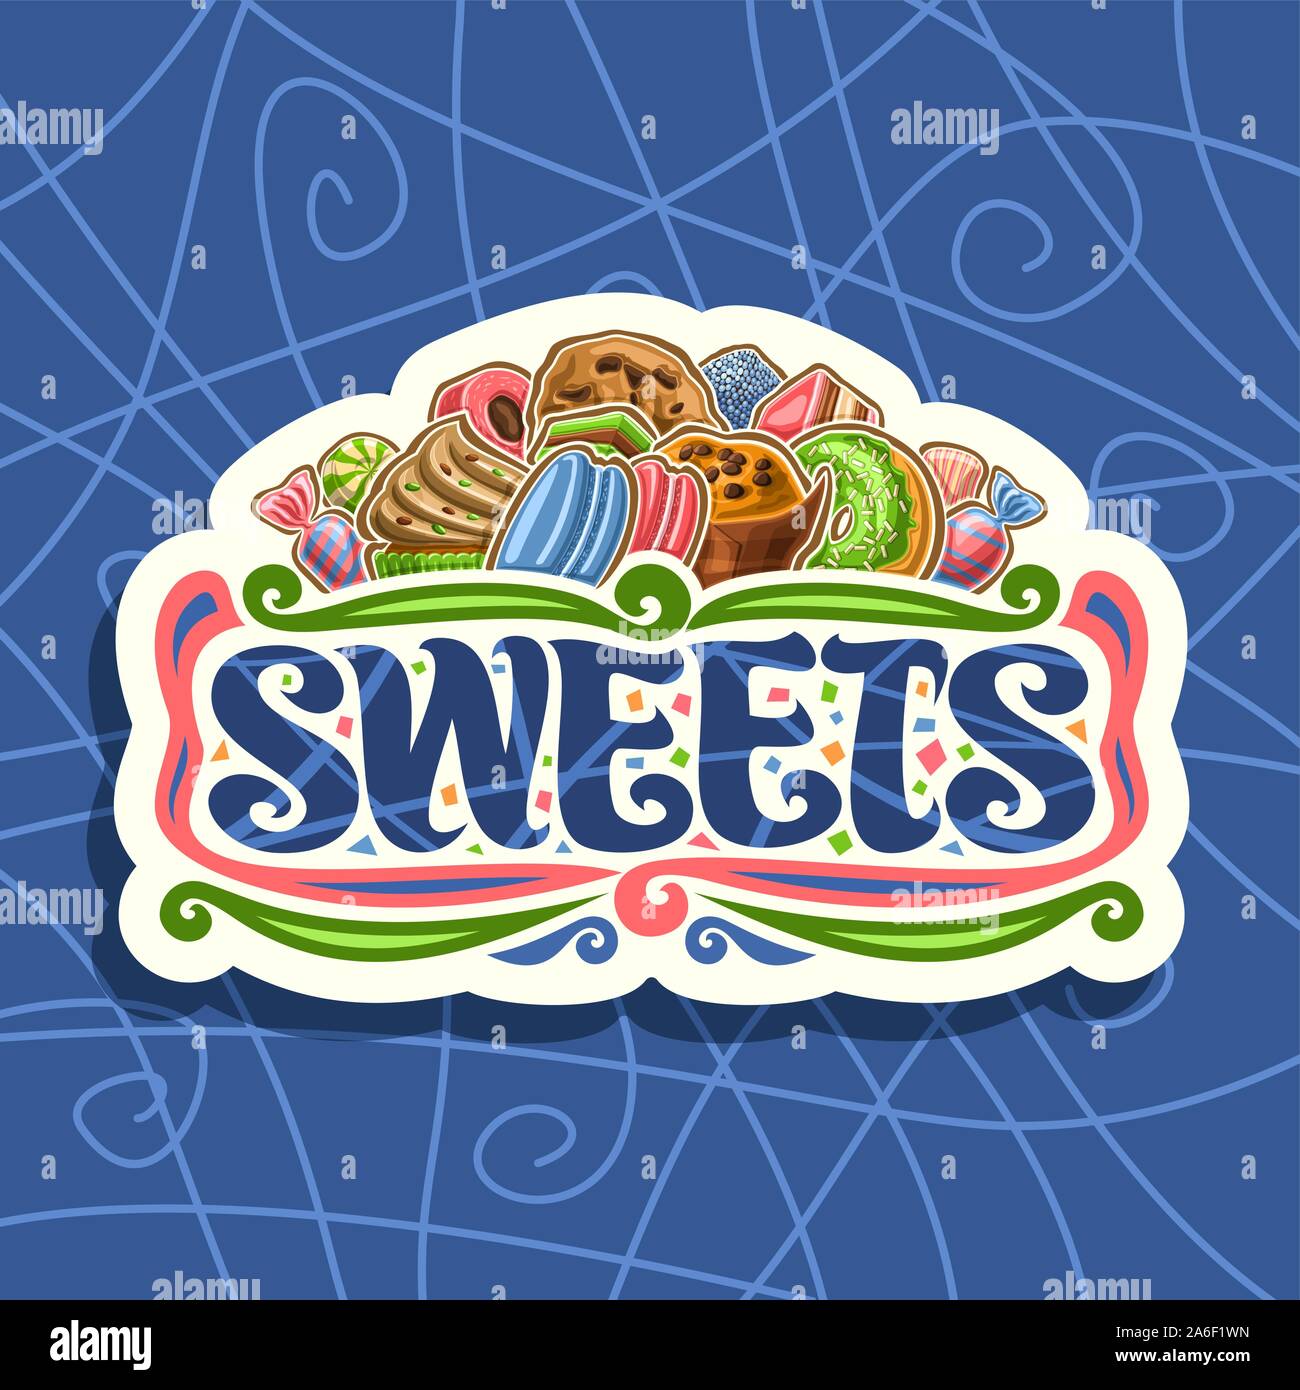 Candys PNG Image, Candy Stickers, Fluorescent Color Sweets